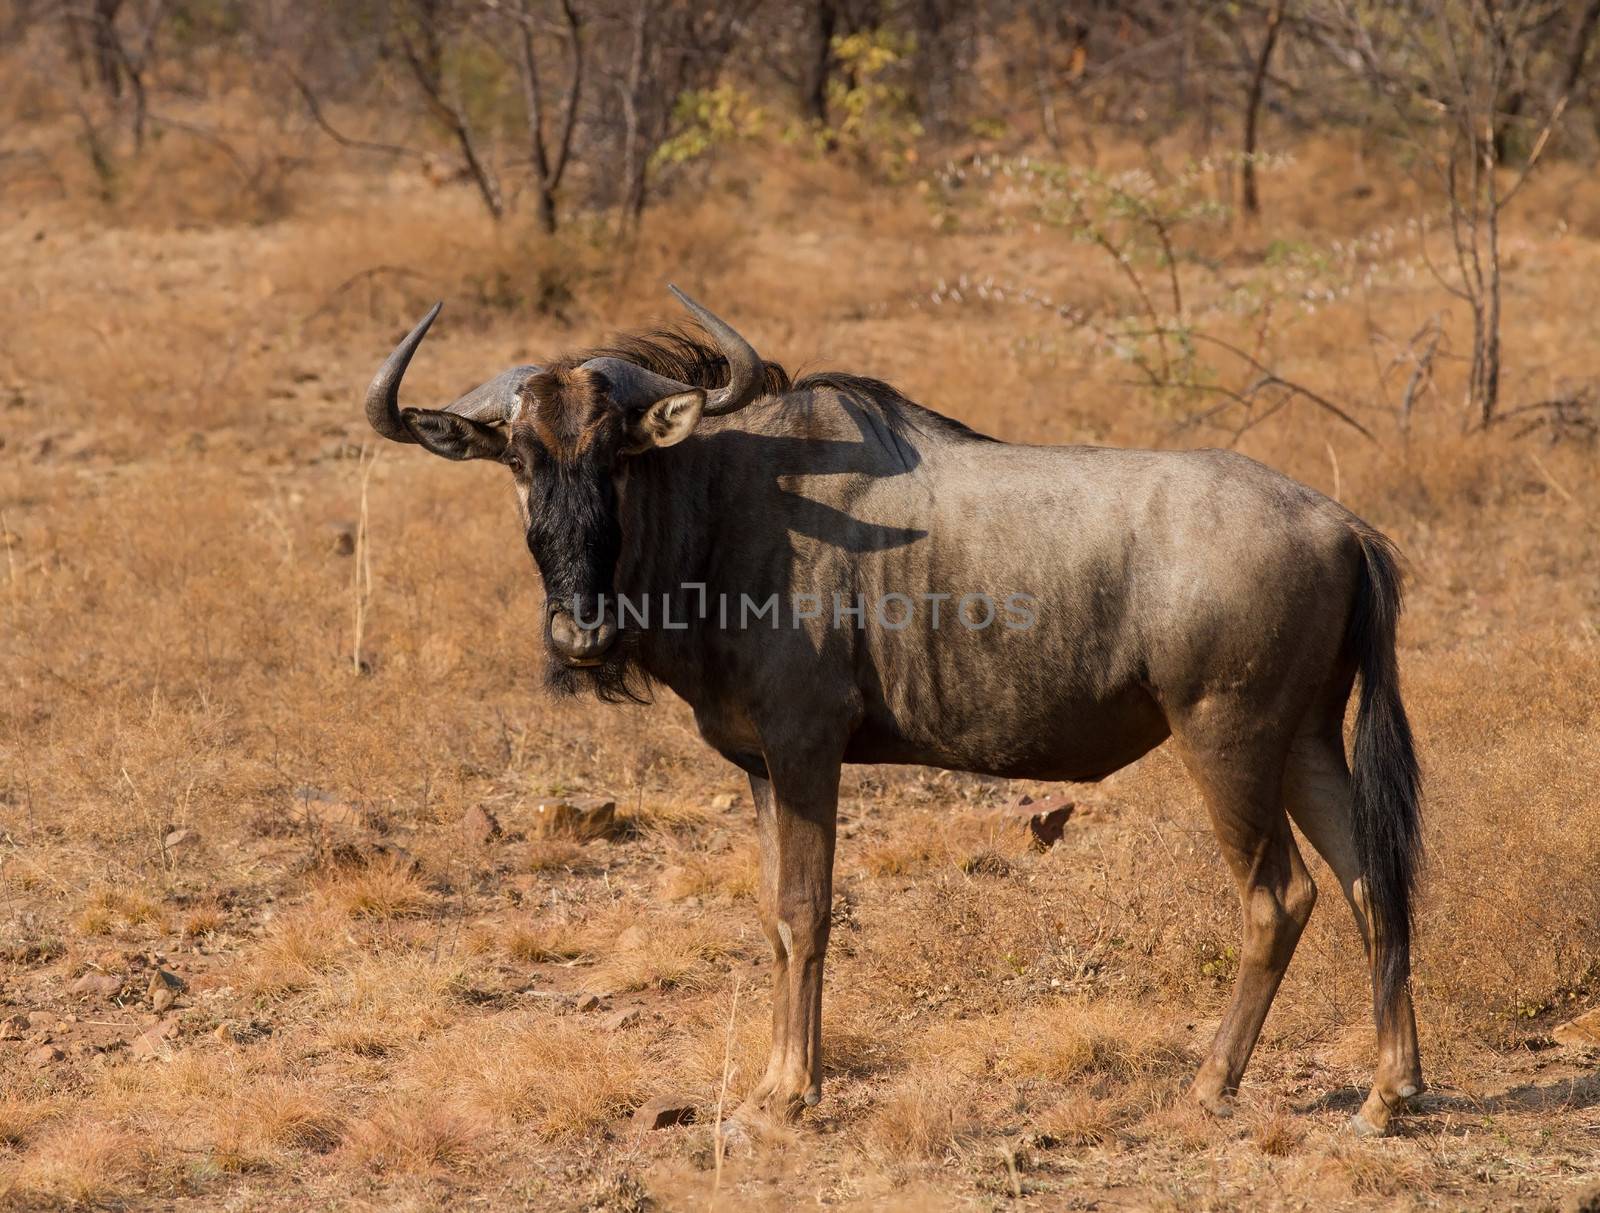 Wildebeest standing on the African grass plains